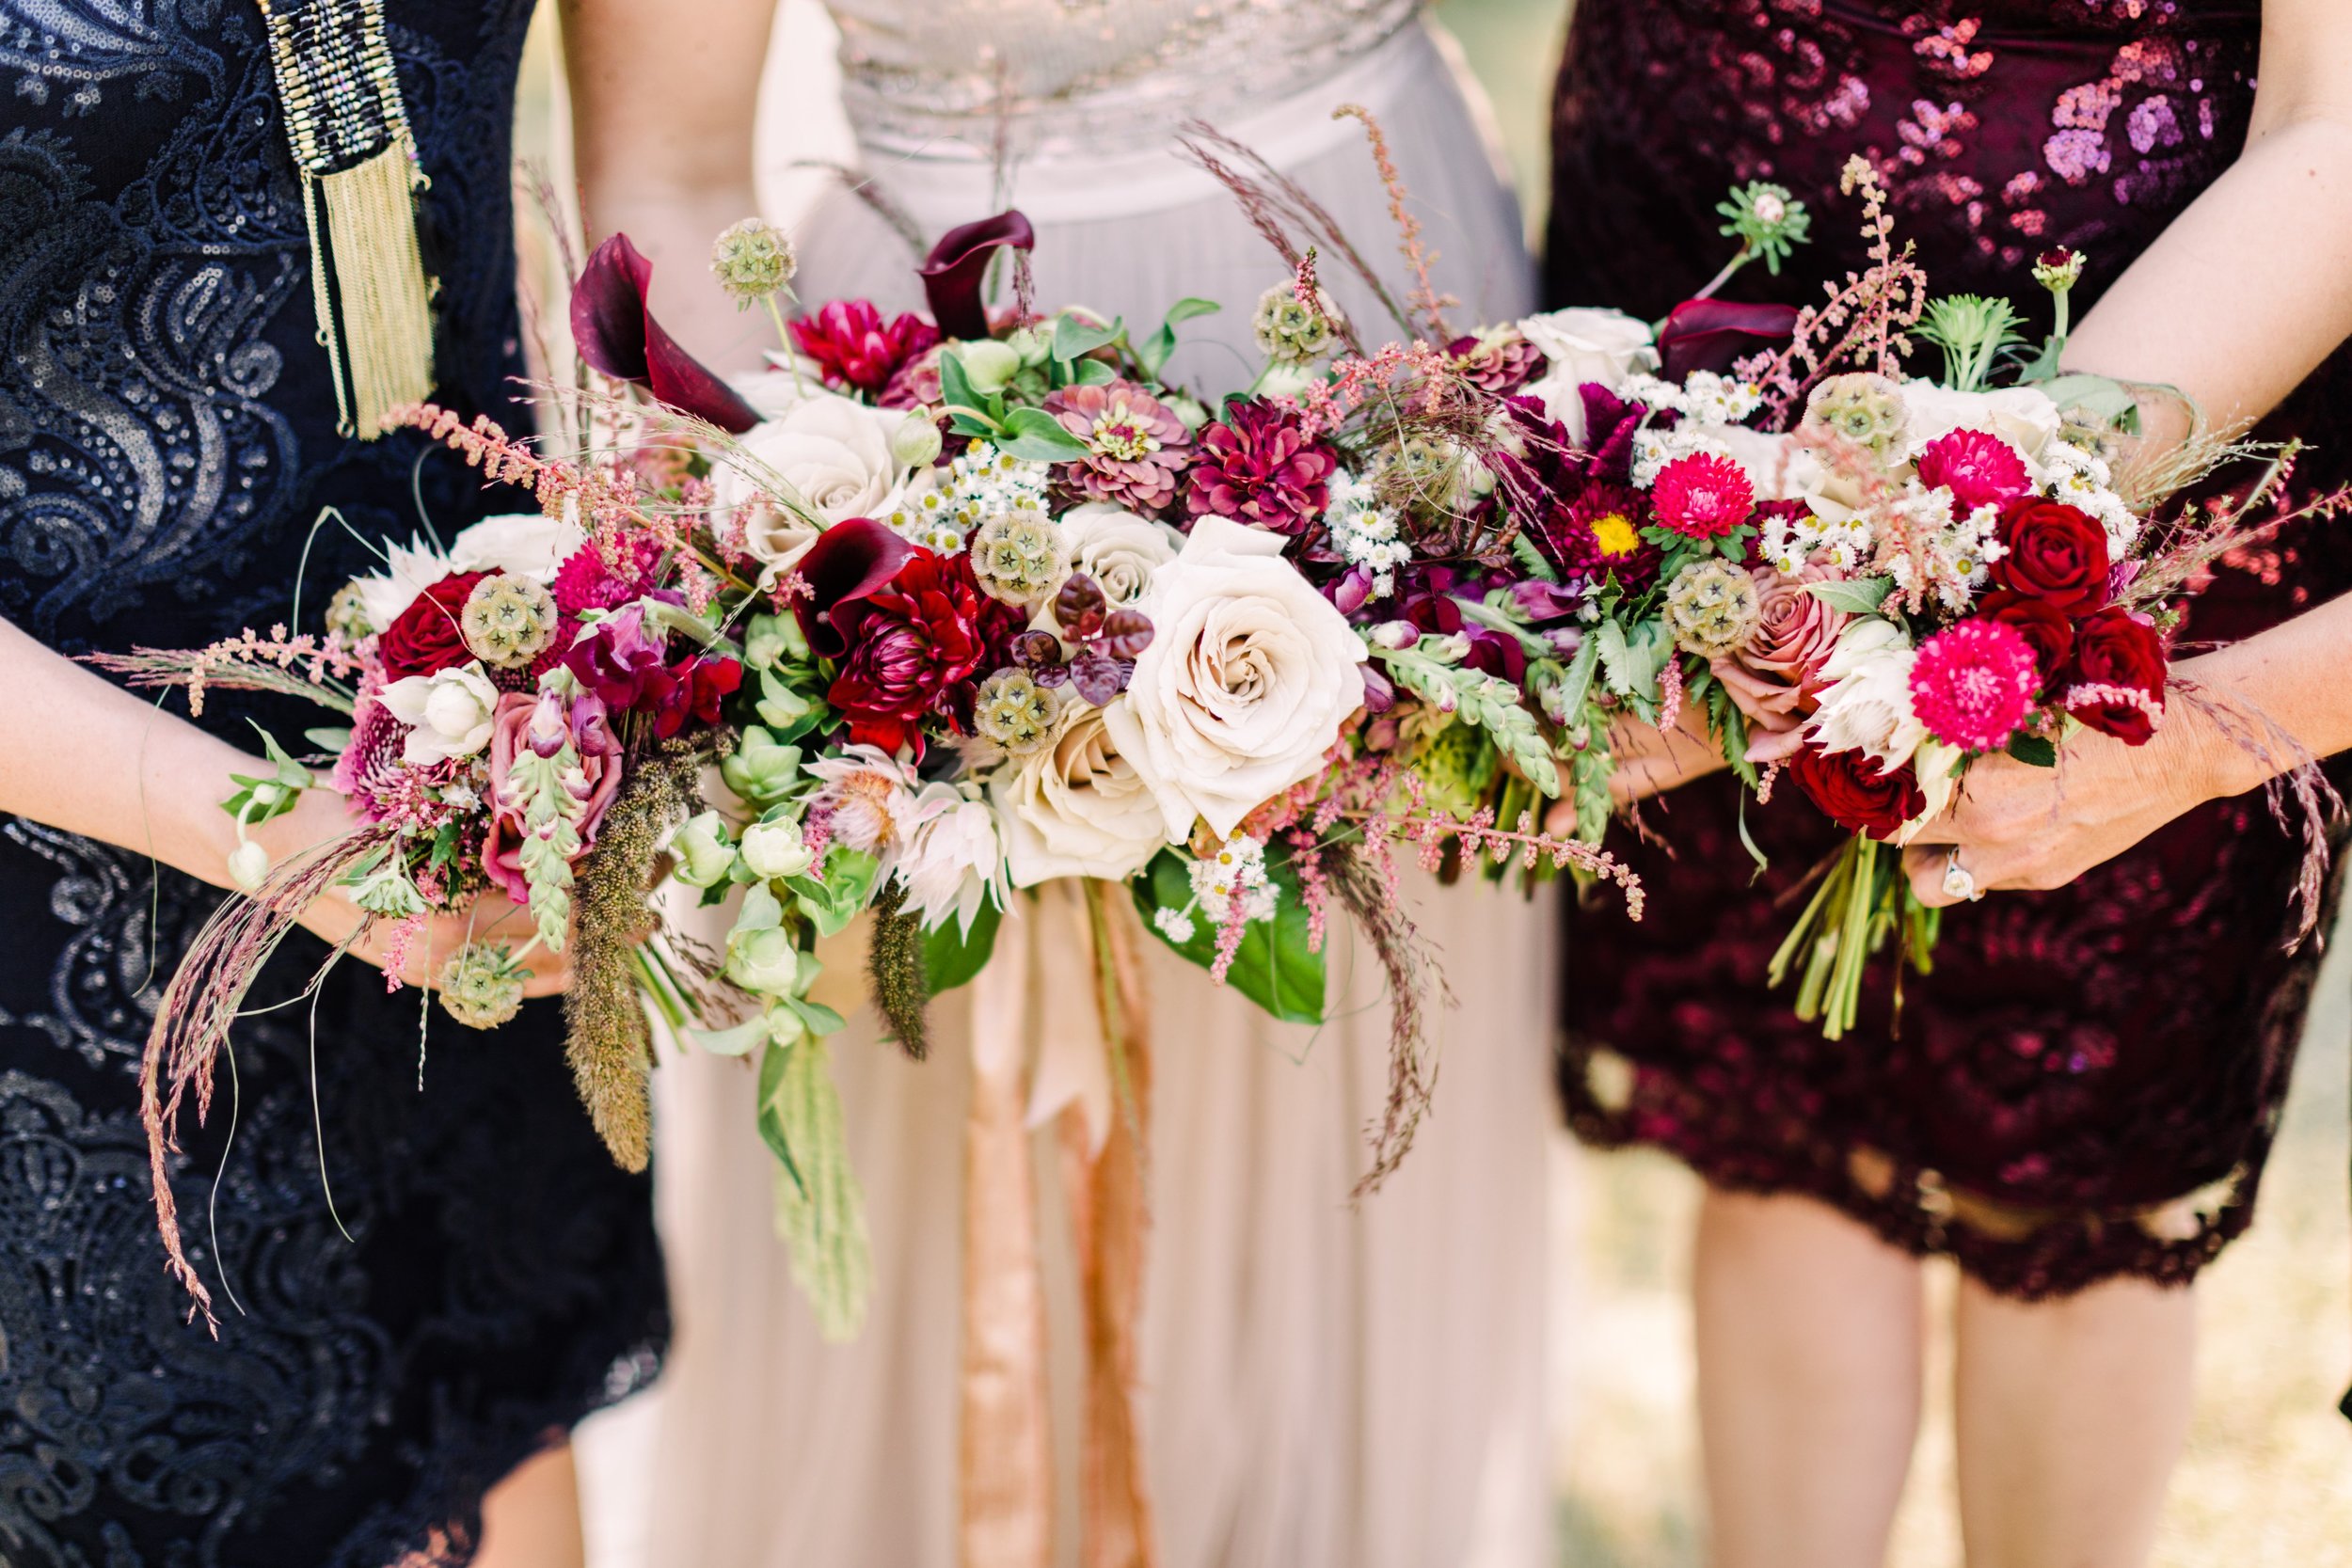 Bridal Party Bouquet Inspiration: 8 Bouquet Pictures Sure to Get You in the Mood For Wedding Season - Chickweed Cottage on the Bronte Bride Blog